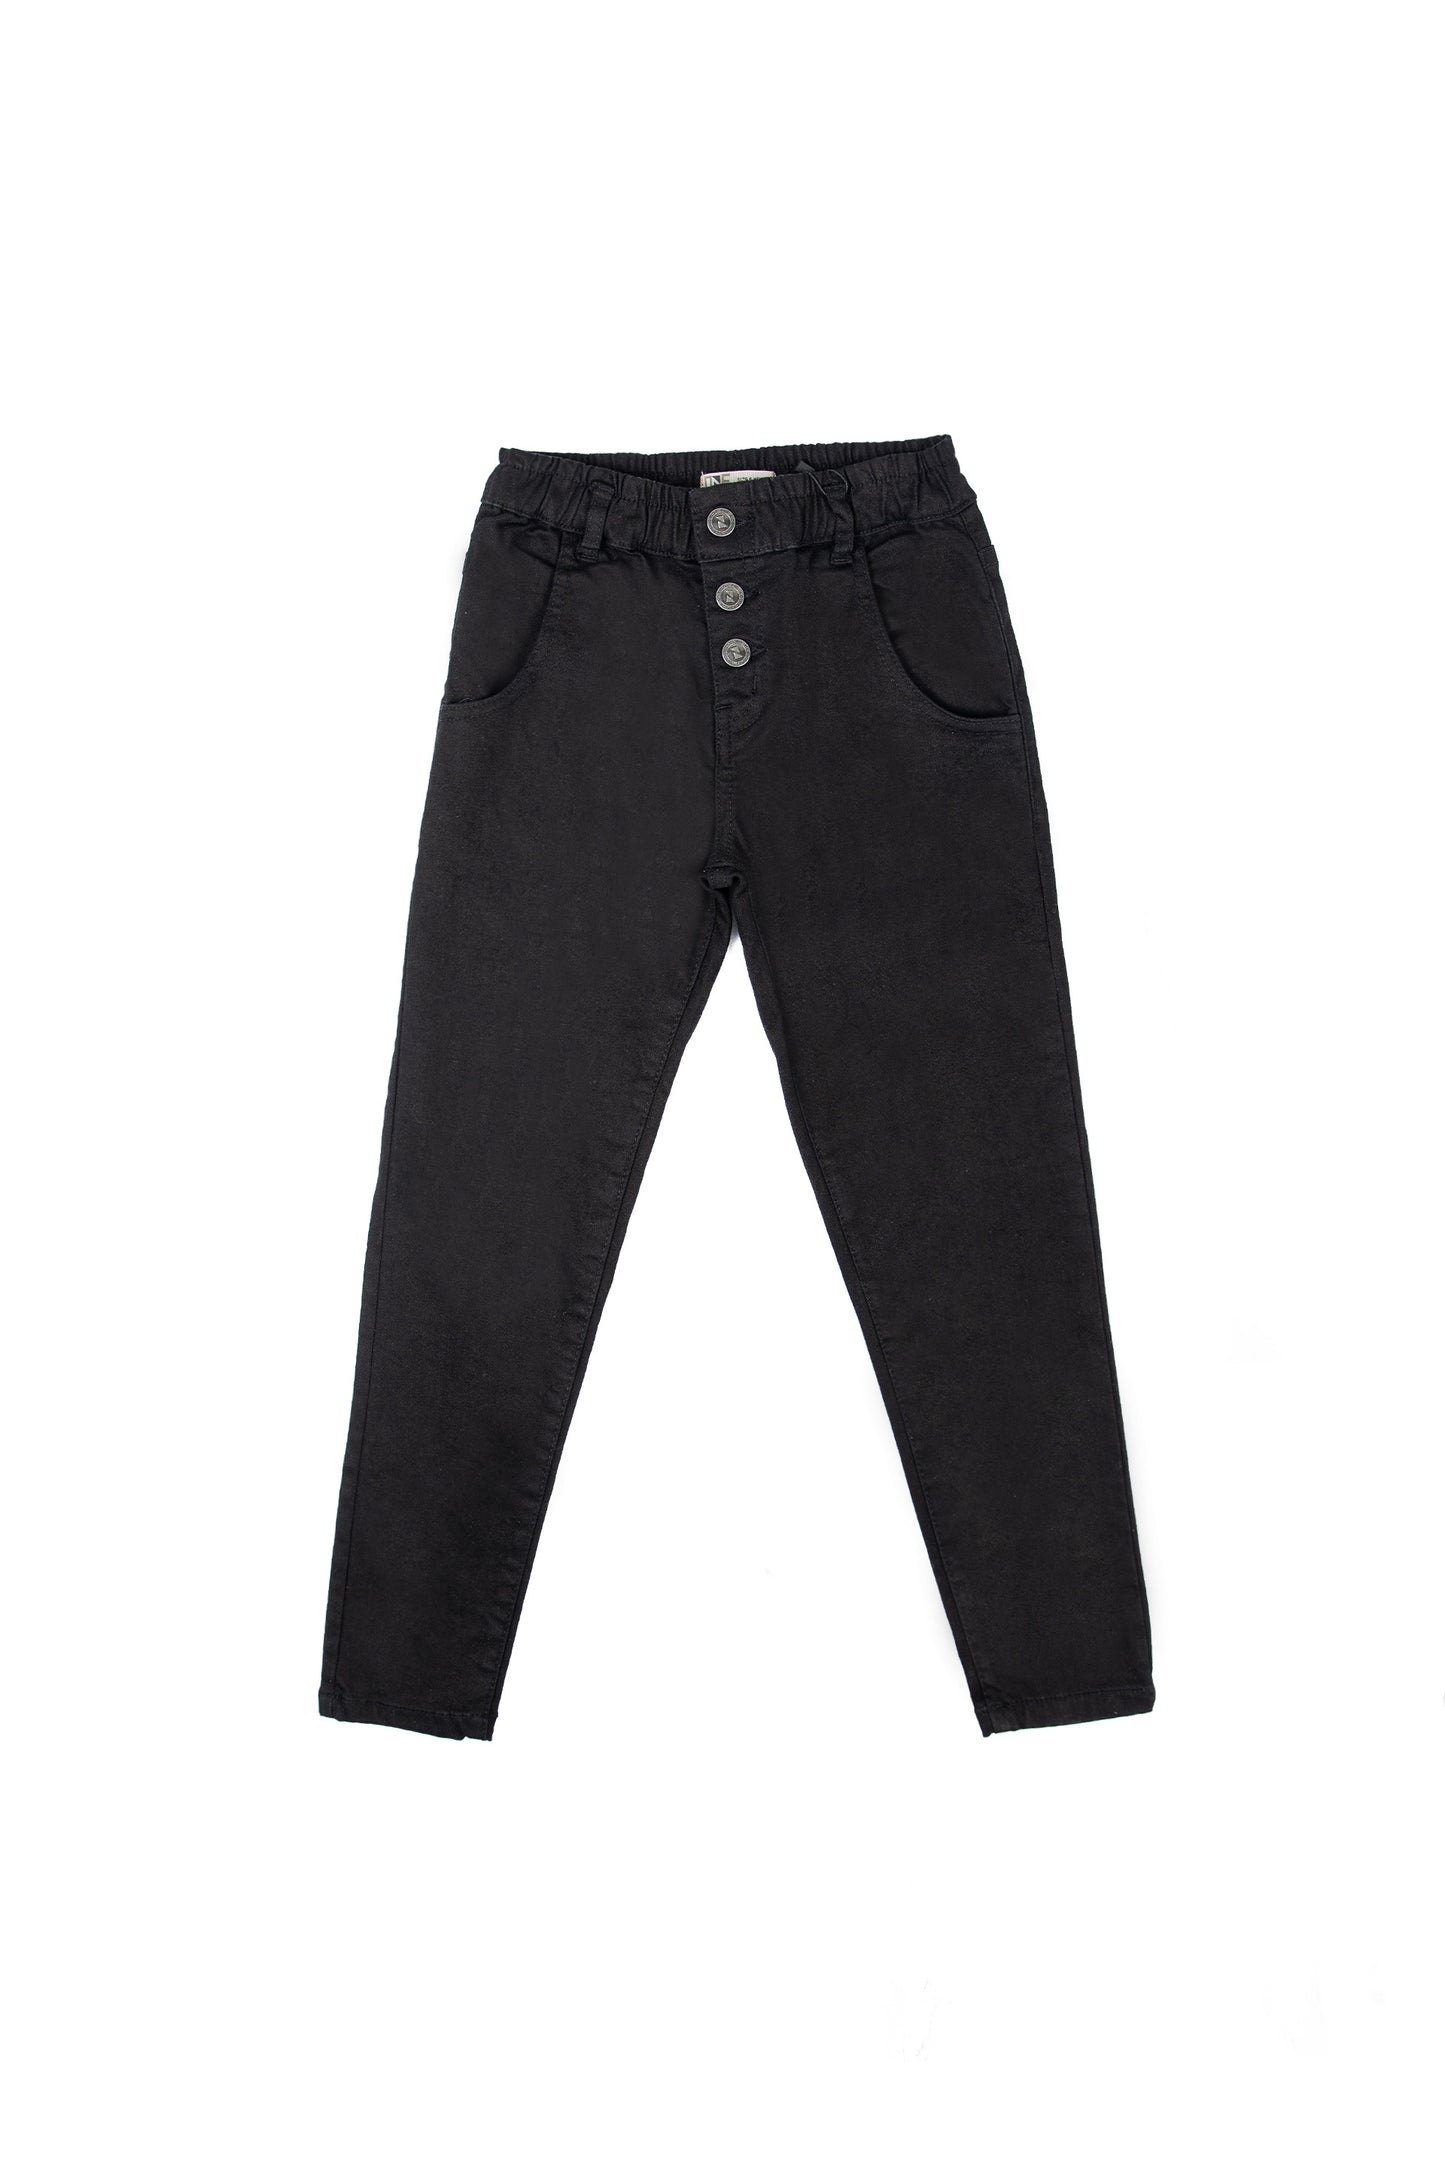 Buttoned Jeans Black